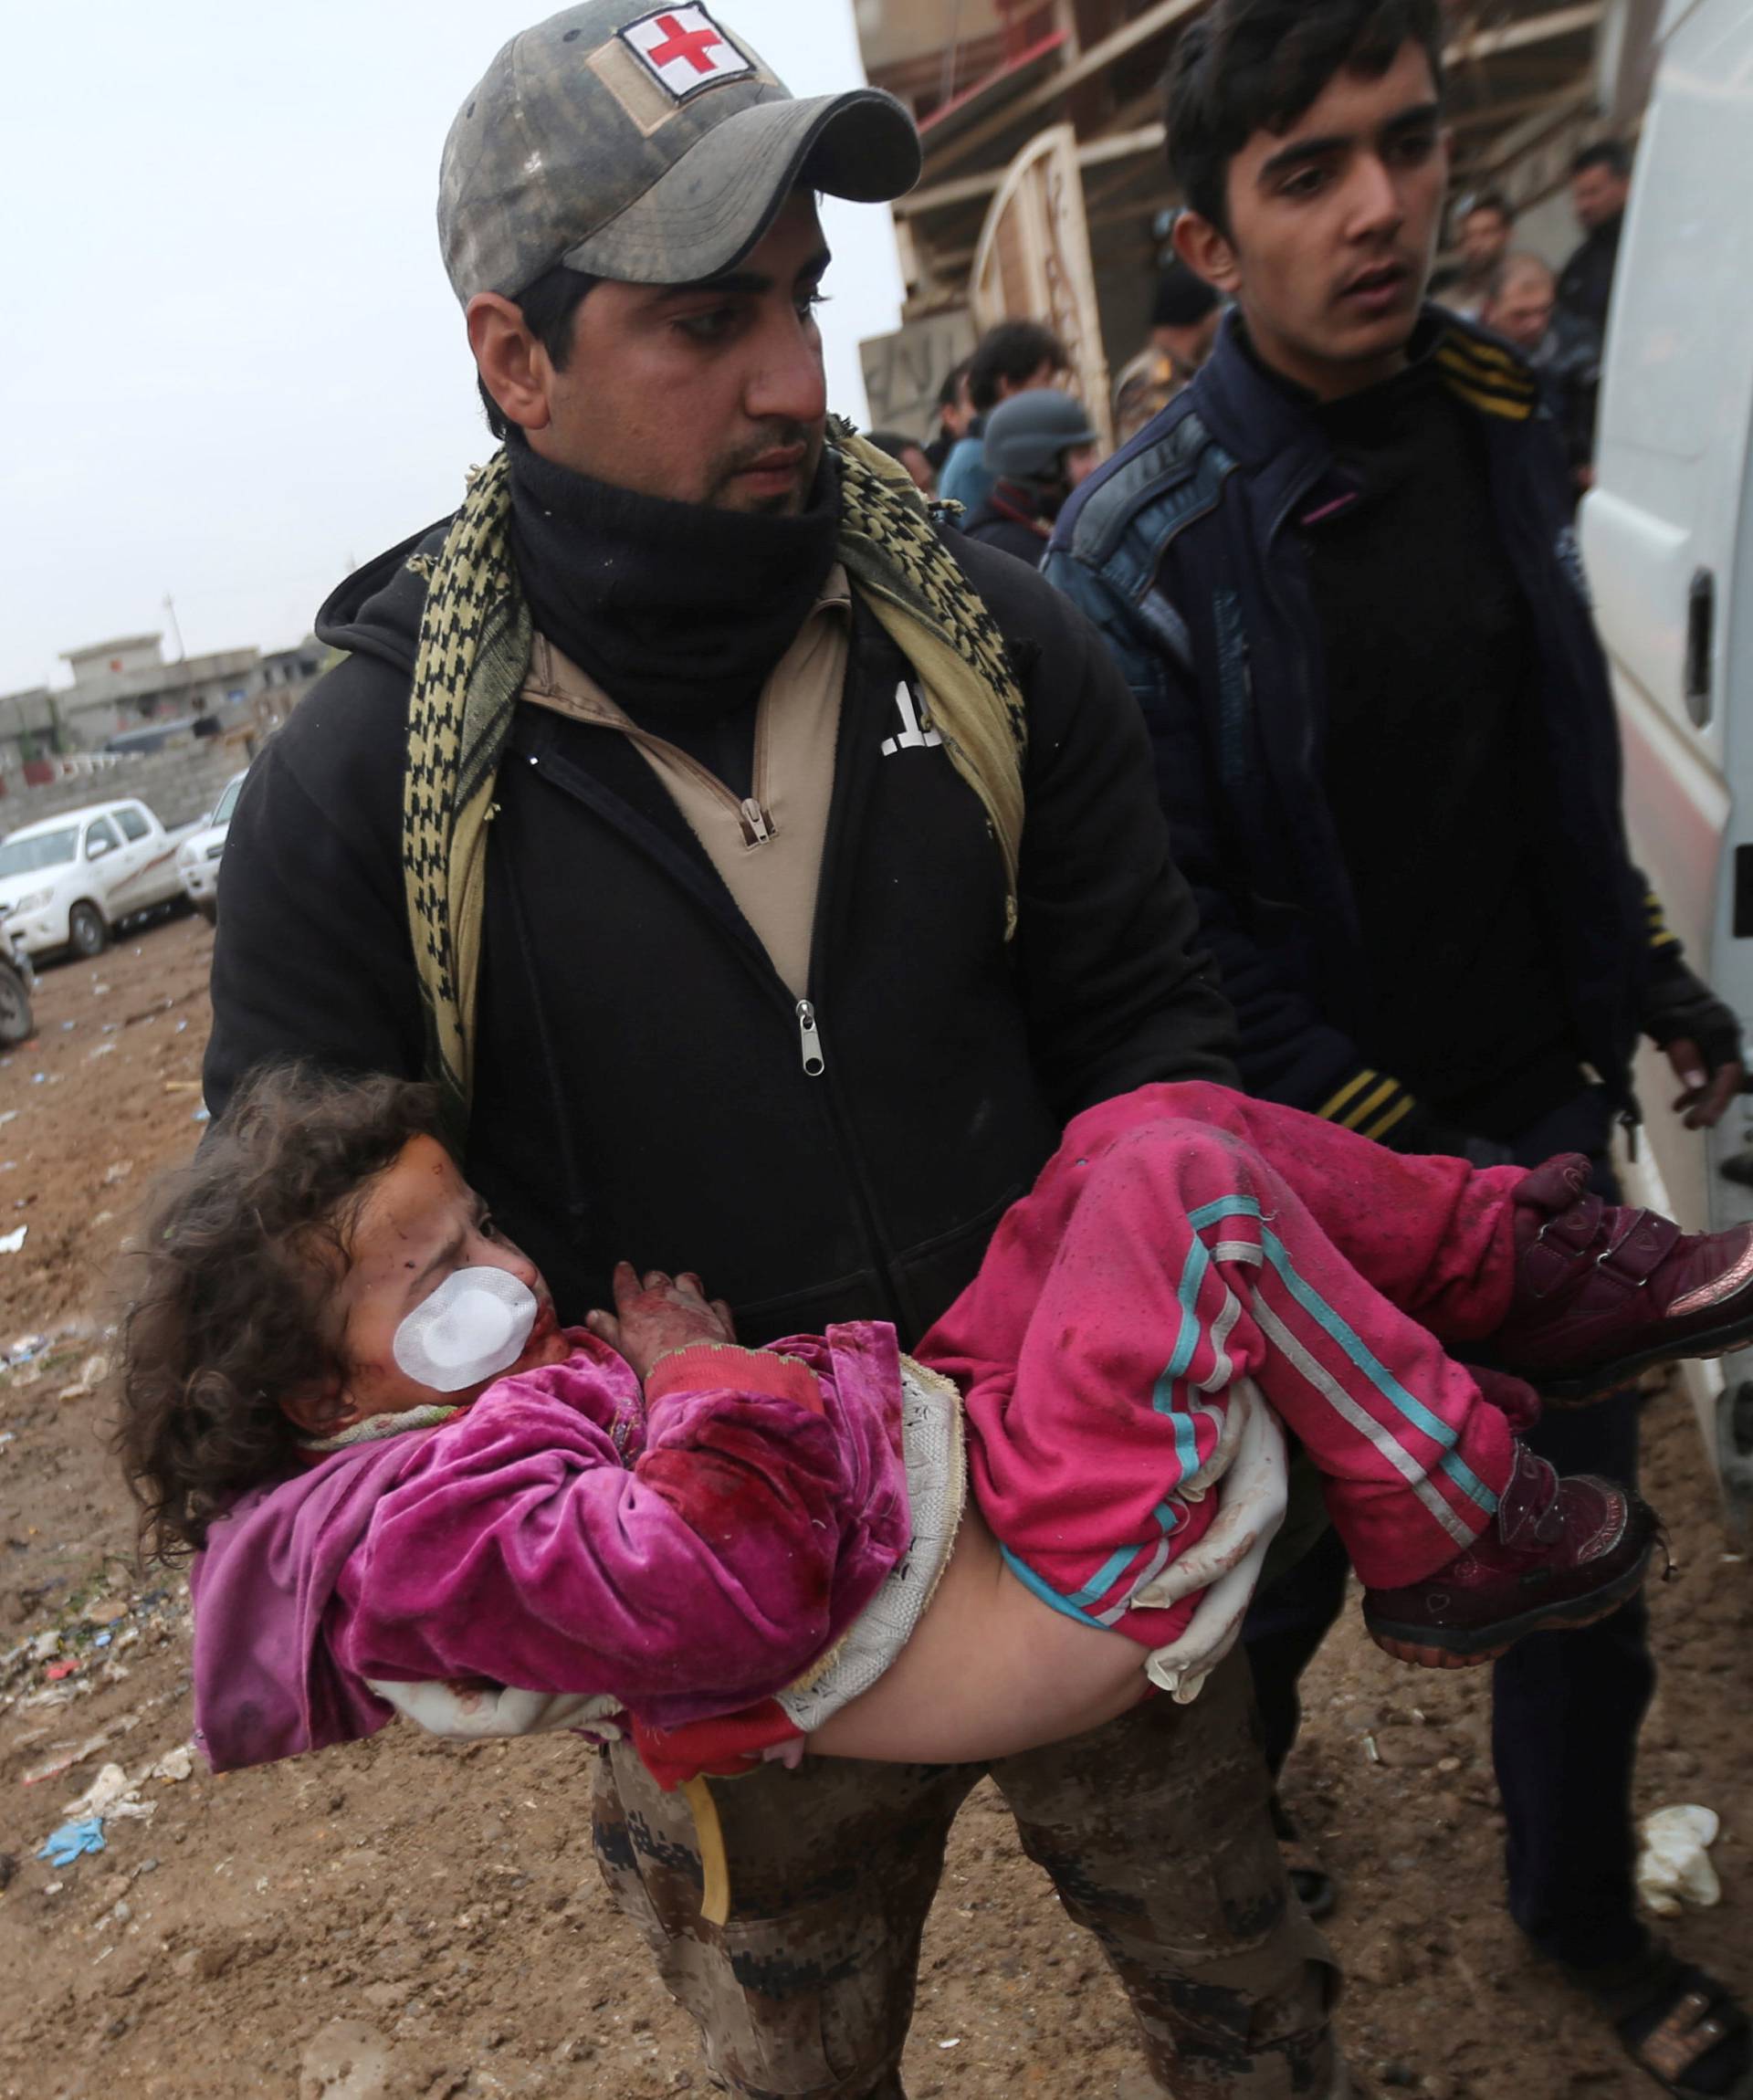 An Iraqi soldier carries a girl who was wounded during clashes in the Islamic State stronghold of Mosul into a field hospital in al-Samah neighborhood Iraq